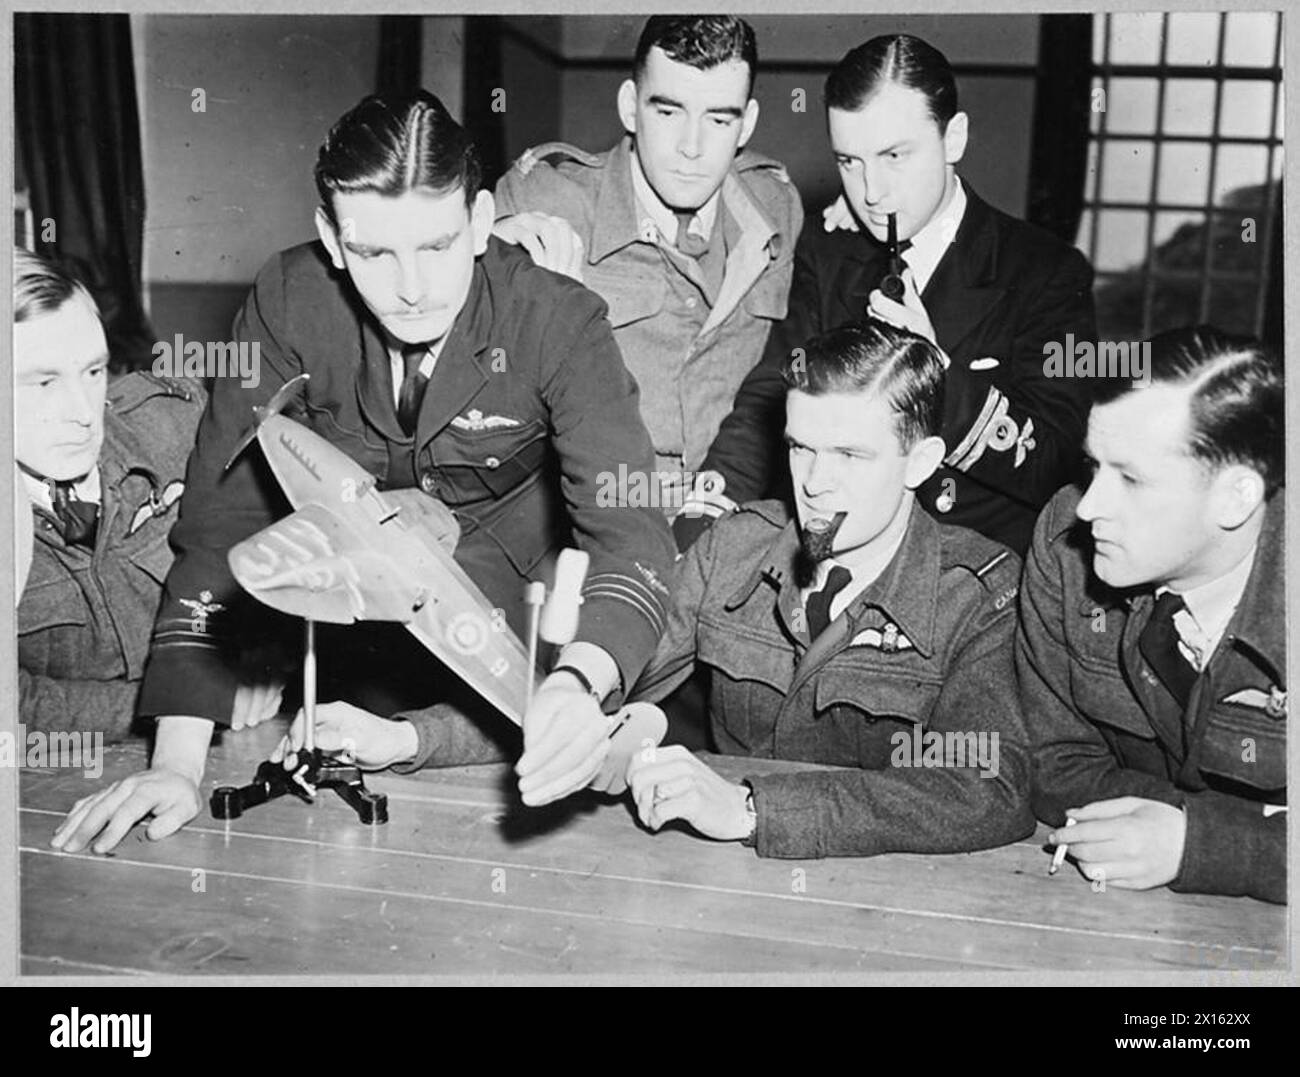 EMPIRE CENTRAL FLYING SCHOOL : AIR UNIVERSITY OF THEALLIED NATIONS. - (Picture issued 1943) 8186. Officers at the E.C.F.S. studying how air flows past an aircraft in flight. A wind tunnel mounted on the bench provides an air stream over the model aircraft, which can be tilted to various flight altitudes. The flow over the wings is demonstrated by the behaviour of the tufts of wool on their upper surfaces. The wing-tip air-vortices are shown by the spinning of the small windmill held by the Australian wing commander Royal Air Force Stock Photo